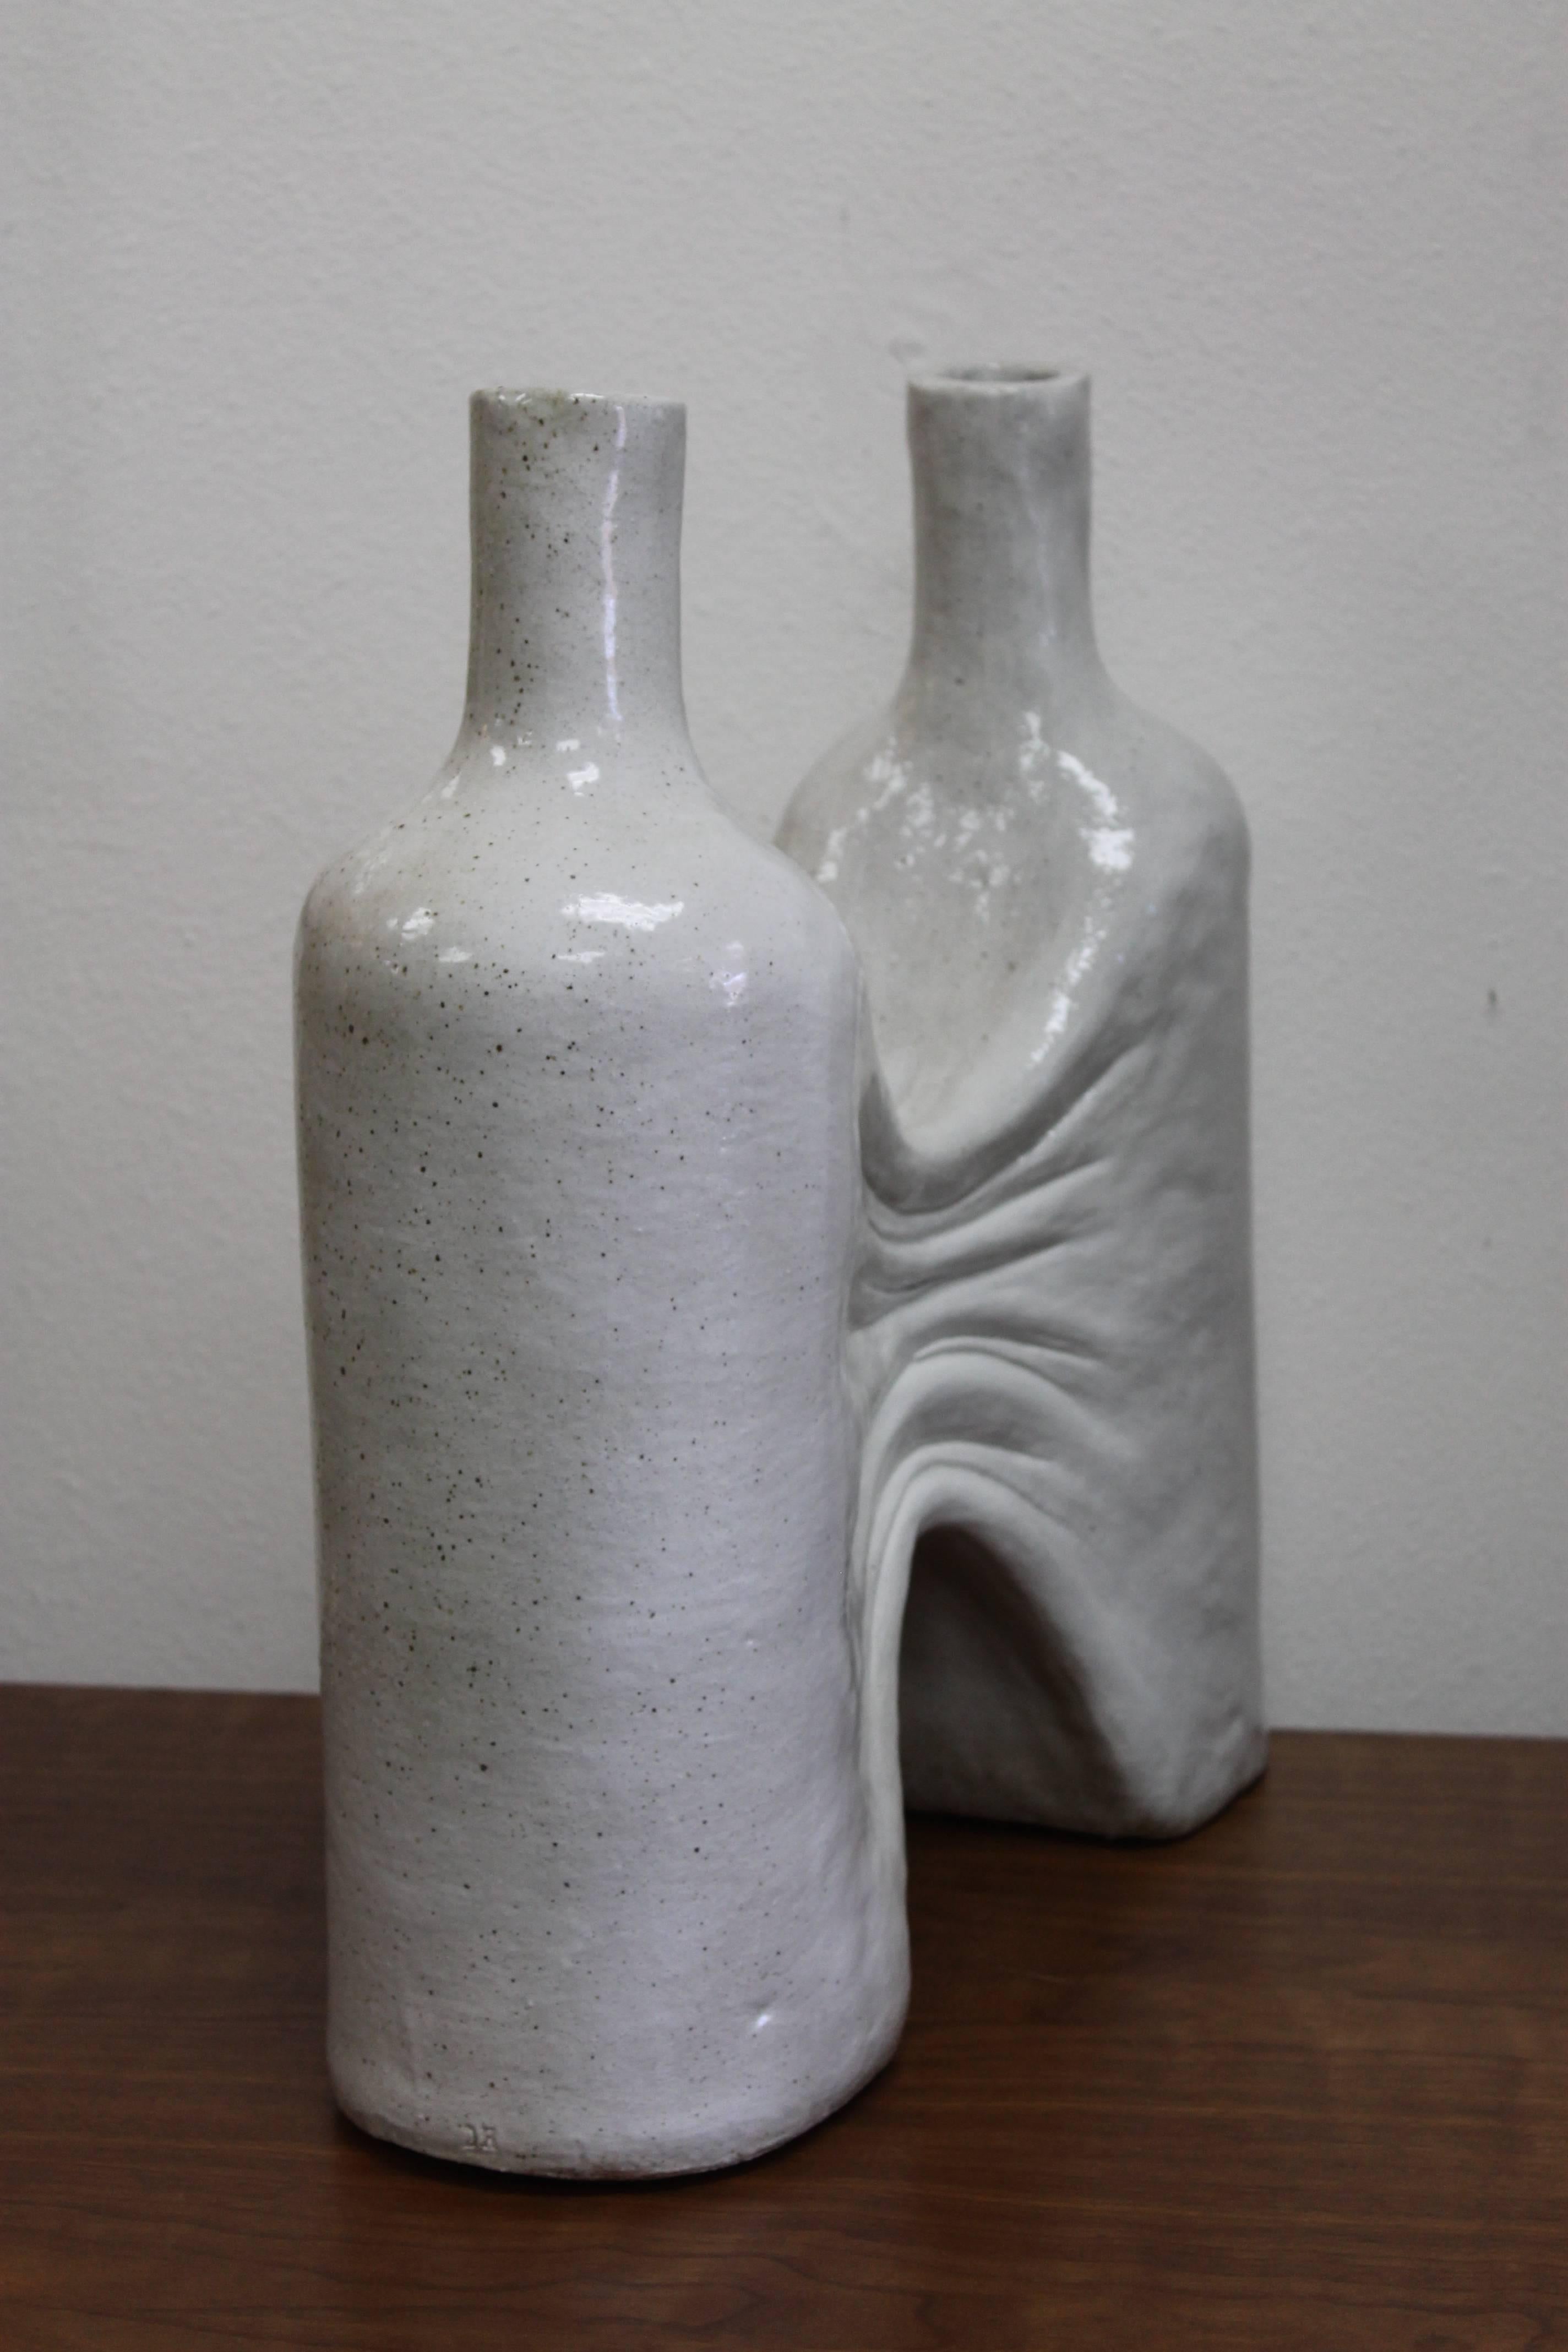 Ceramic vessel can be used as a sculpture or a vase. Created by ceramicist or artist Daric Harvie.